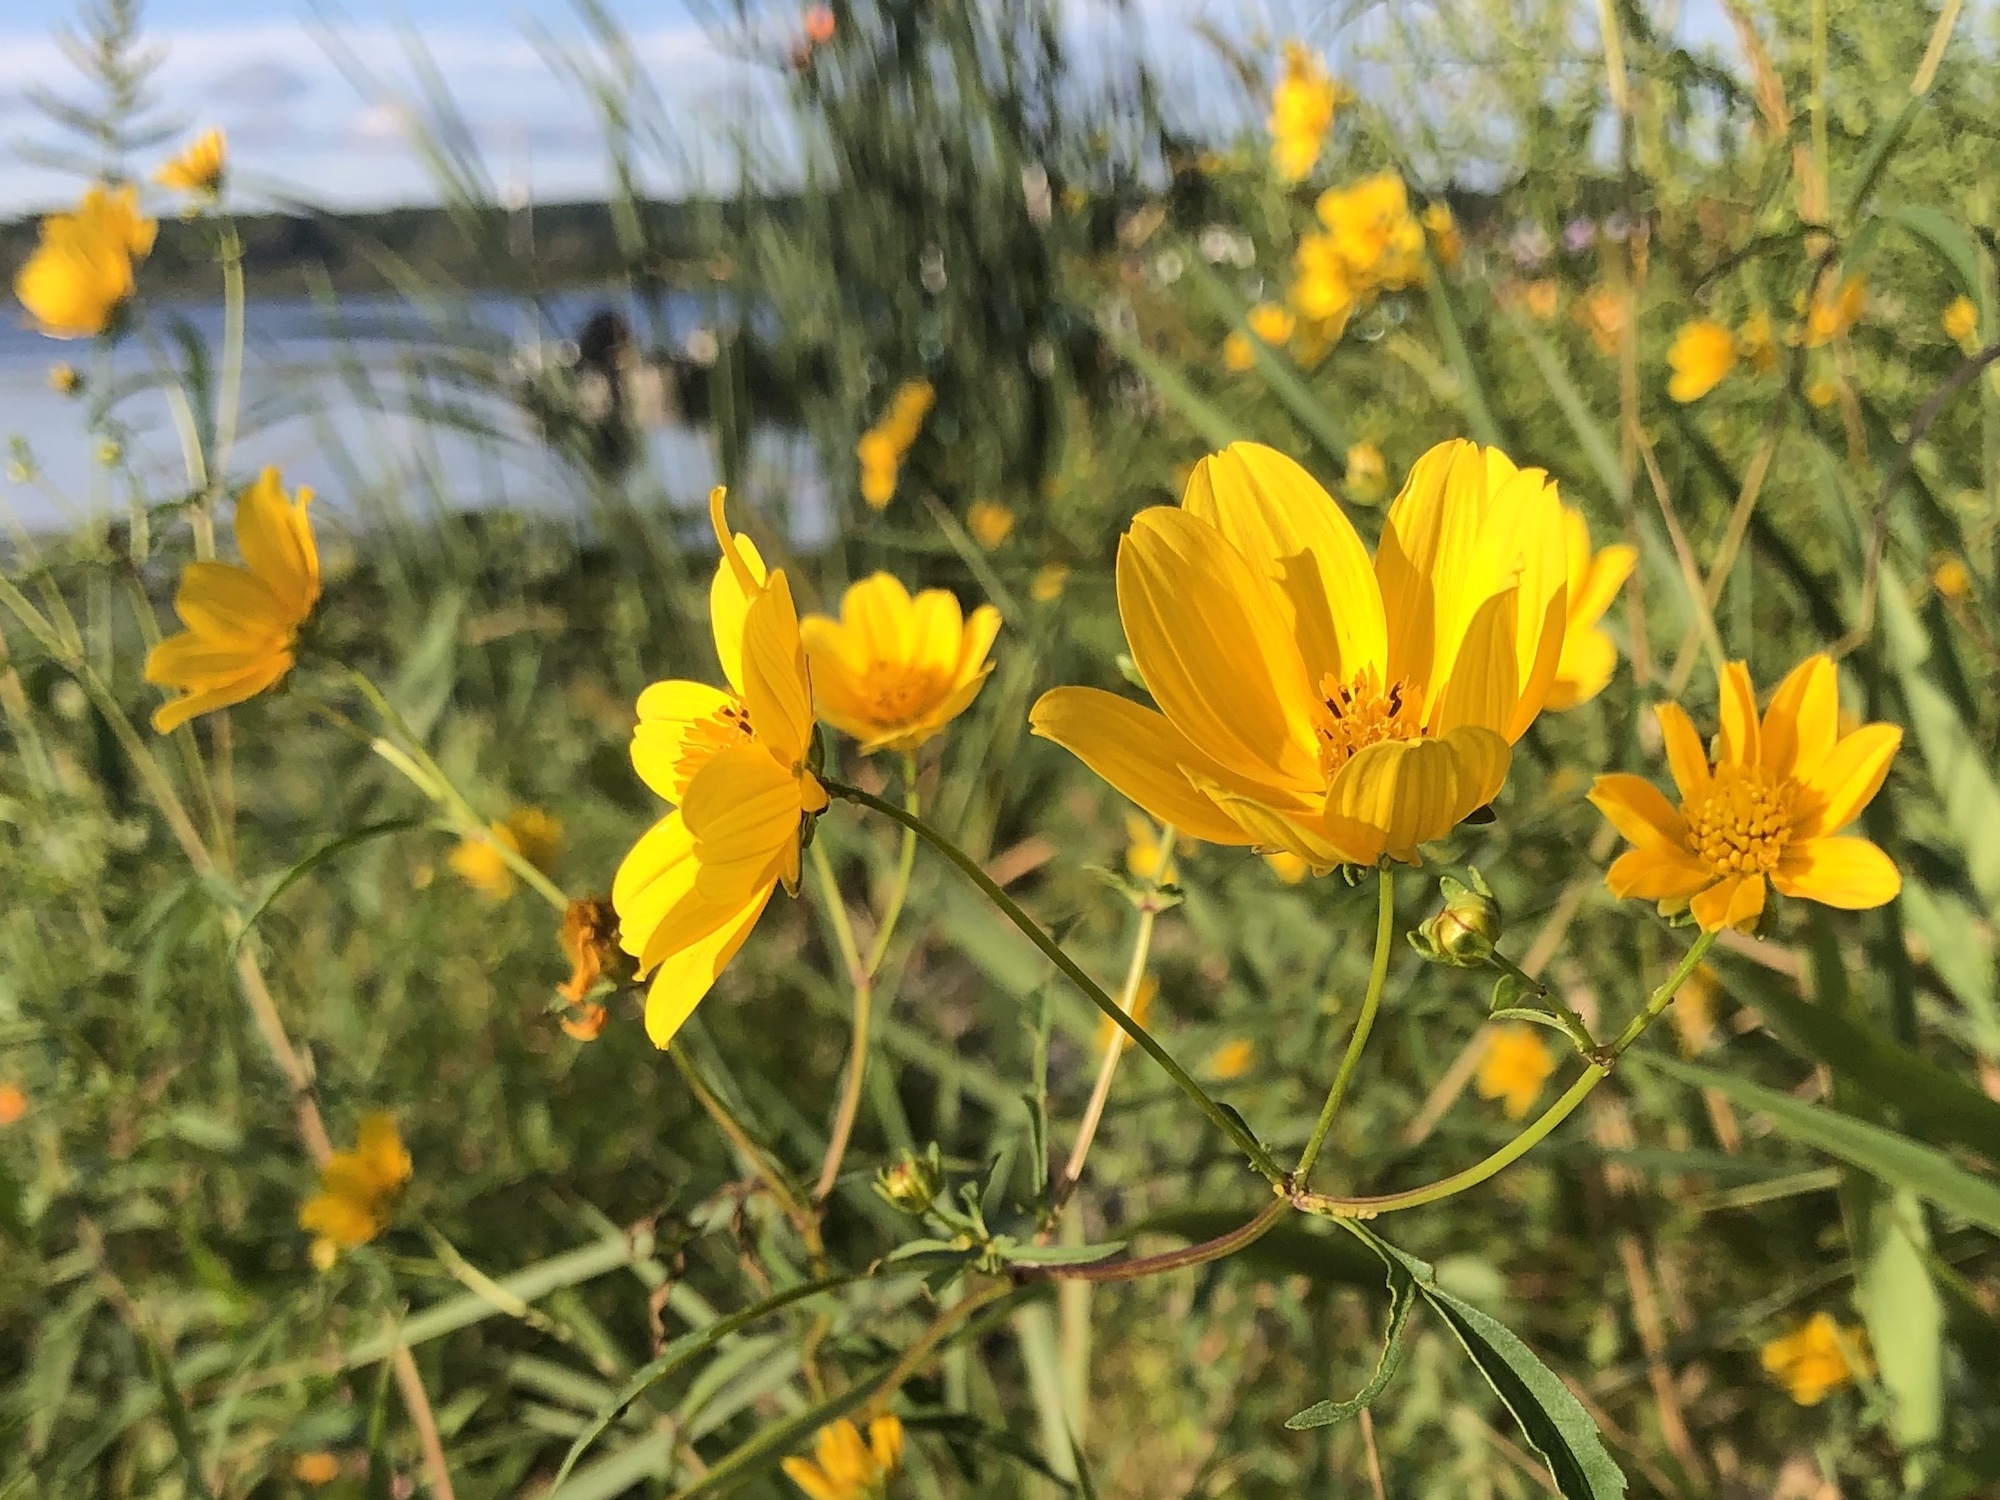 Crowned Beggarticks on shore of Lake Wingra in Wingra Park in Madison, Wisconsin on August 29, 2020.